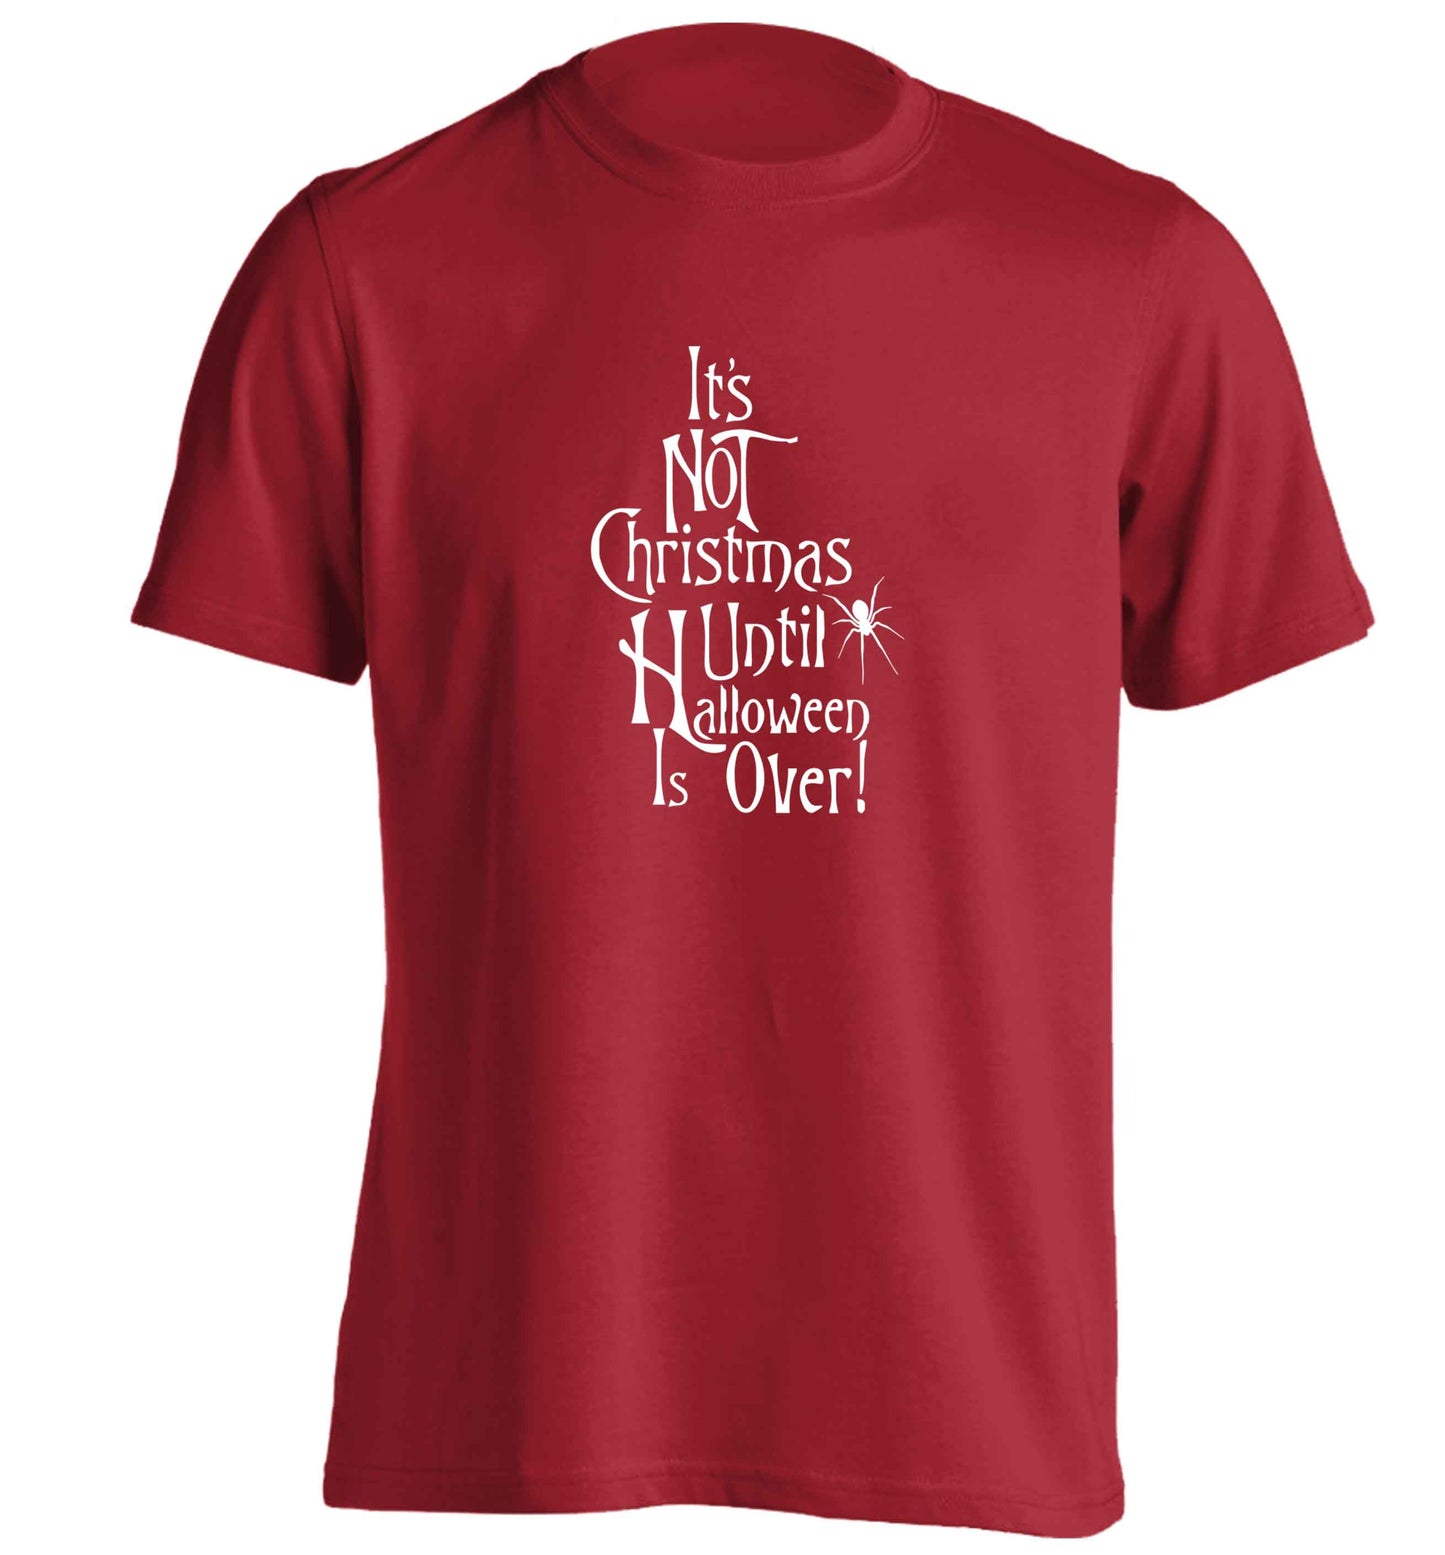 It's not Christmas until Halloween is over adults unisex red Tshirt 2XL